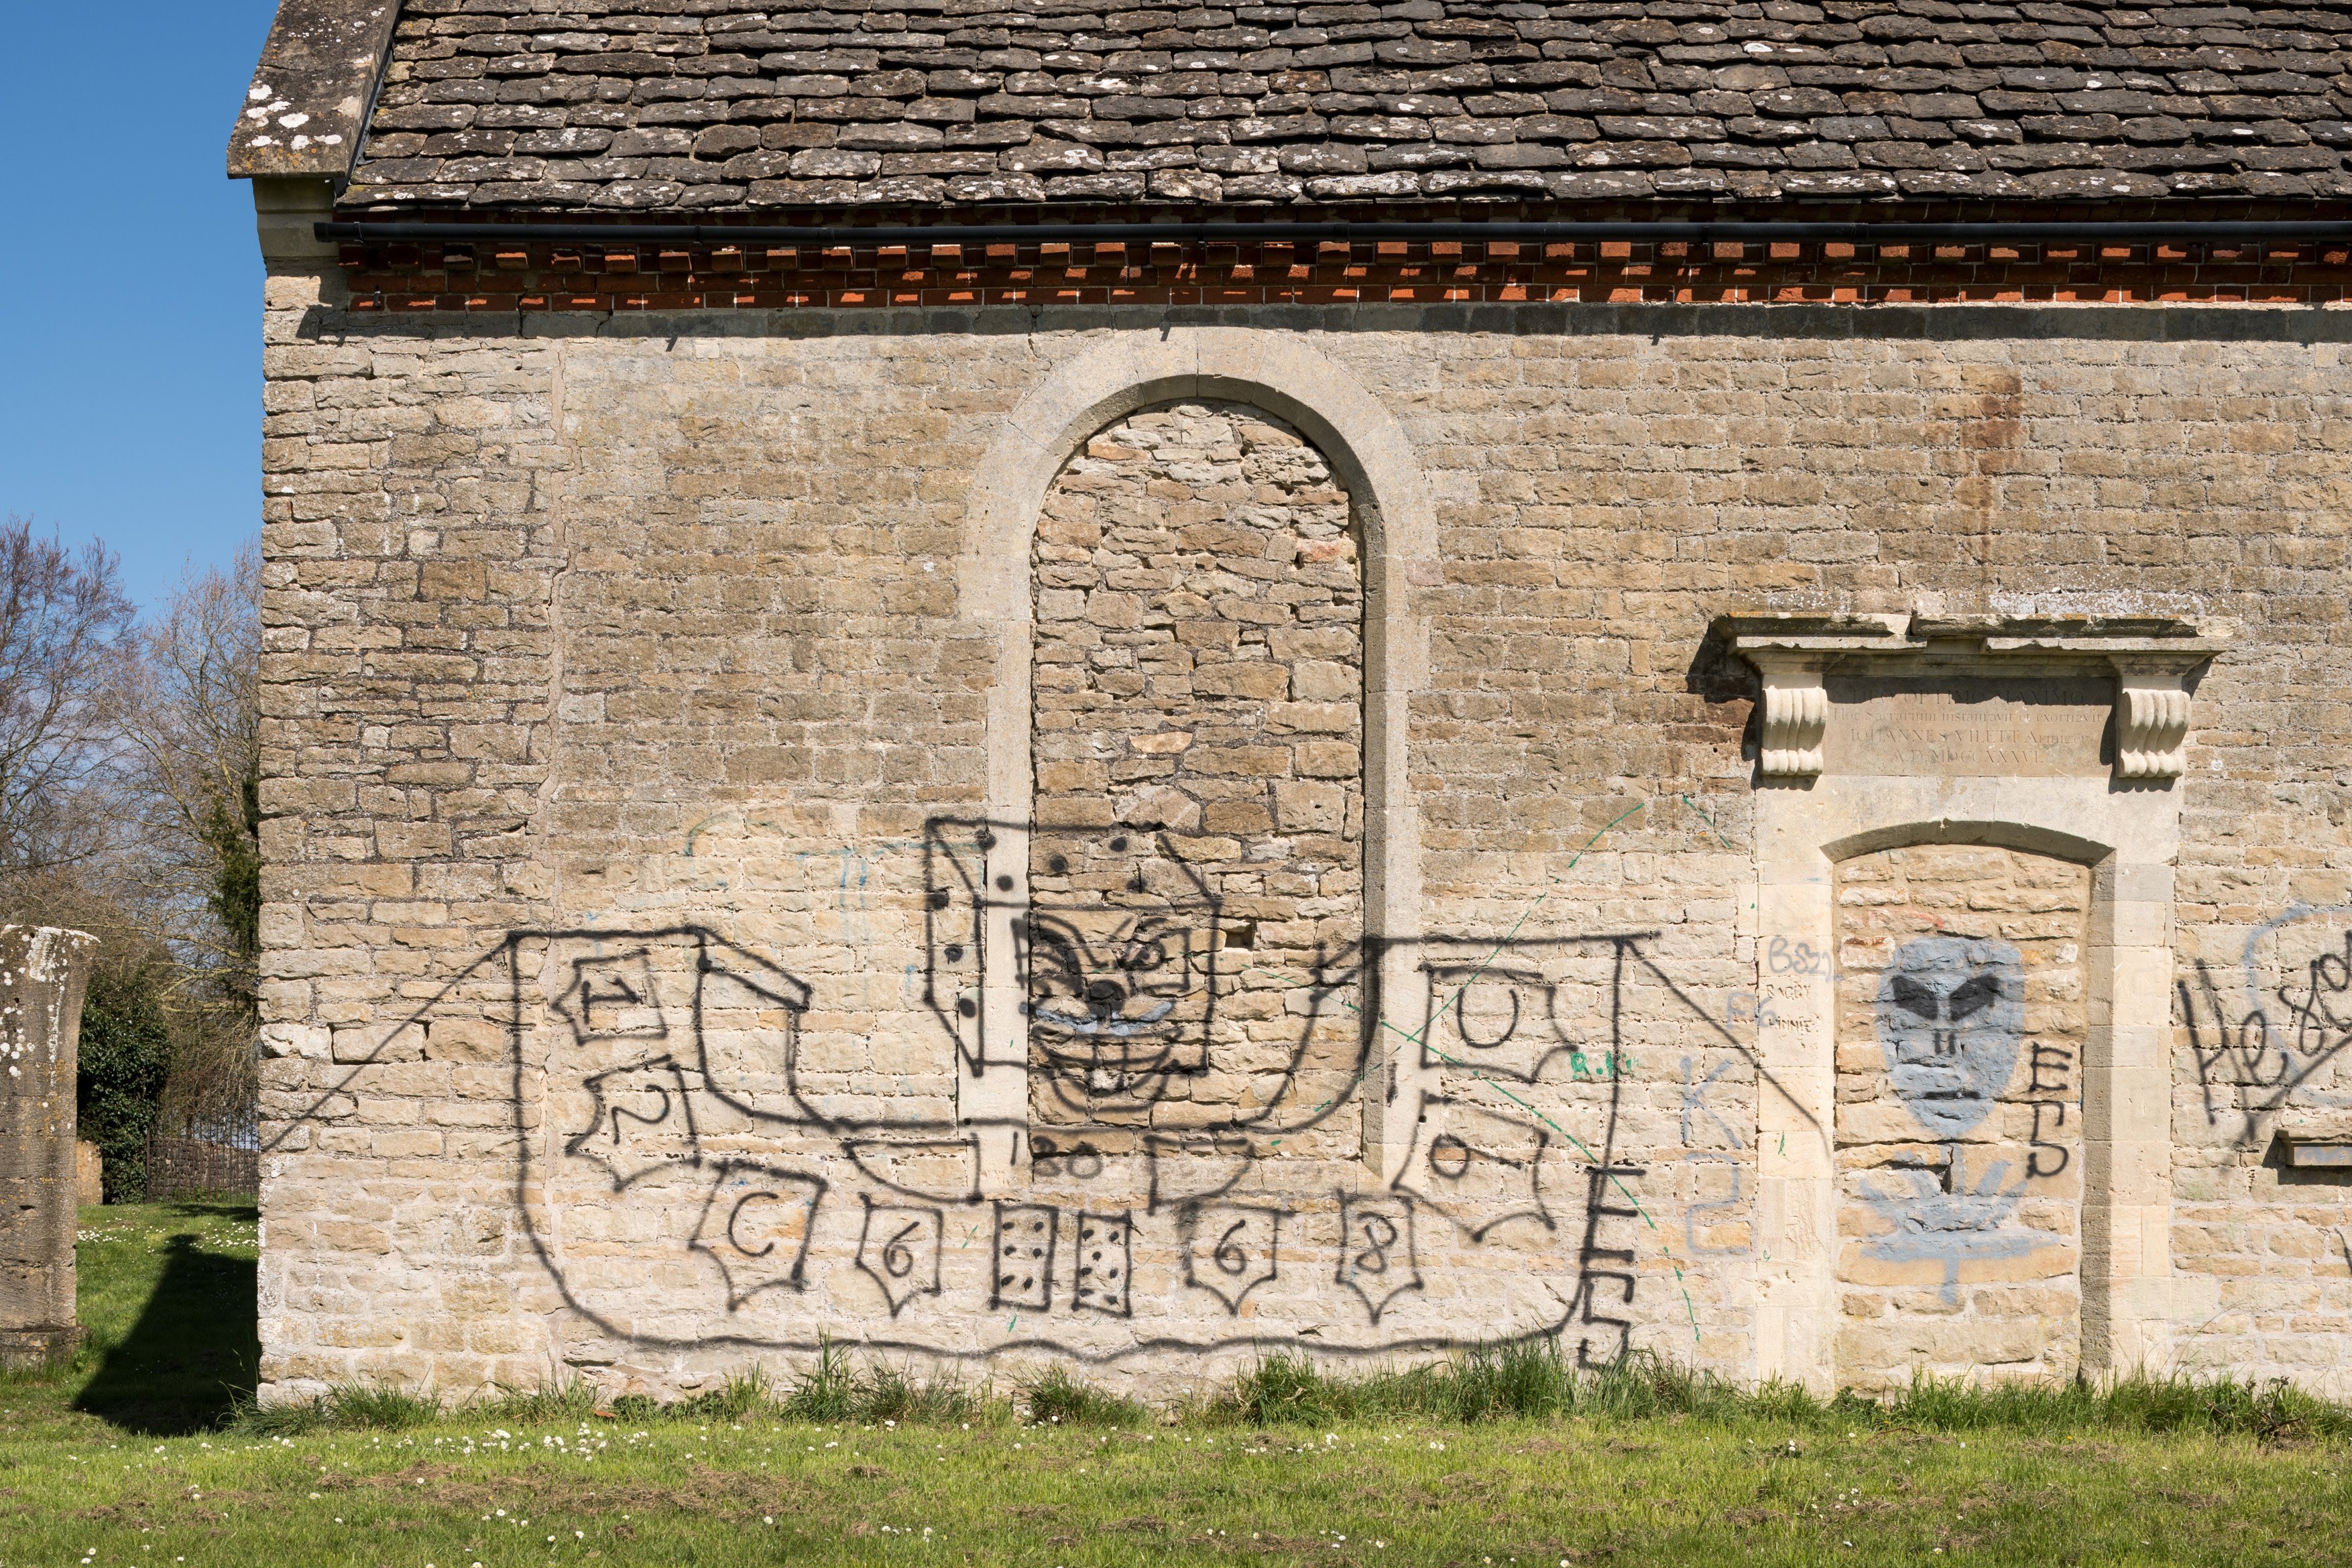 Graffiti on the side of an old stone building, Holy Rood Chapel in Swindon, Wiltshire.